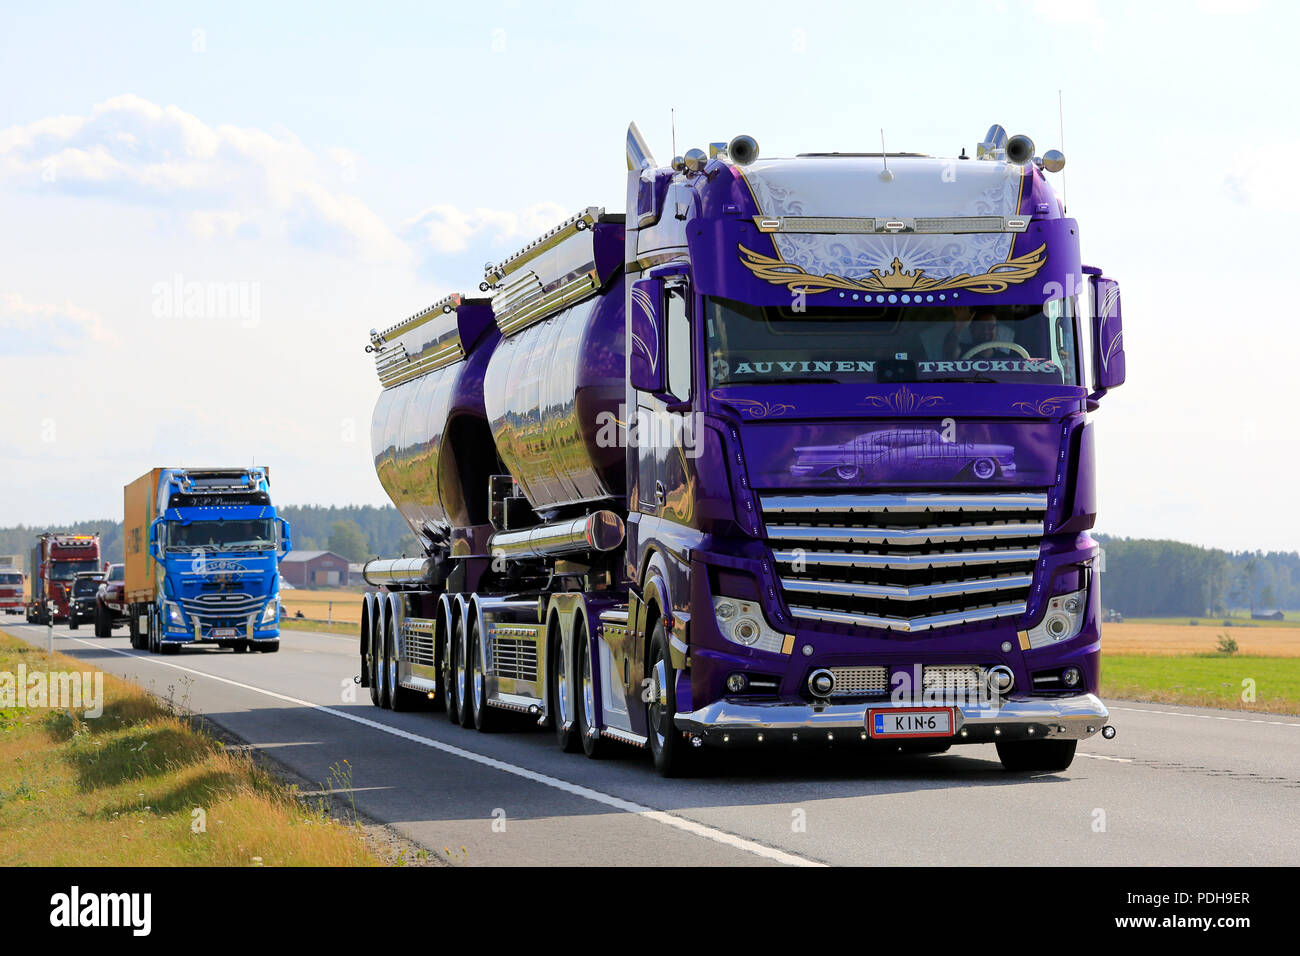 LUOPAJARVI, FINLAND - AUGUST 9, 2018: Mercedes-Benz Actros Lowrider of Kuljetus Auvinen Oy on truck convoy to Power Truck Show 2018 held in Alahärmä, Finland. Credit: Taina Sohlman/Alamy Live News Stock Photo